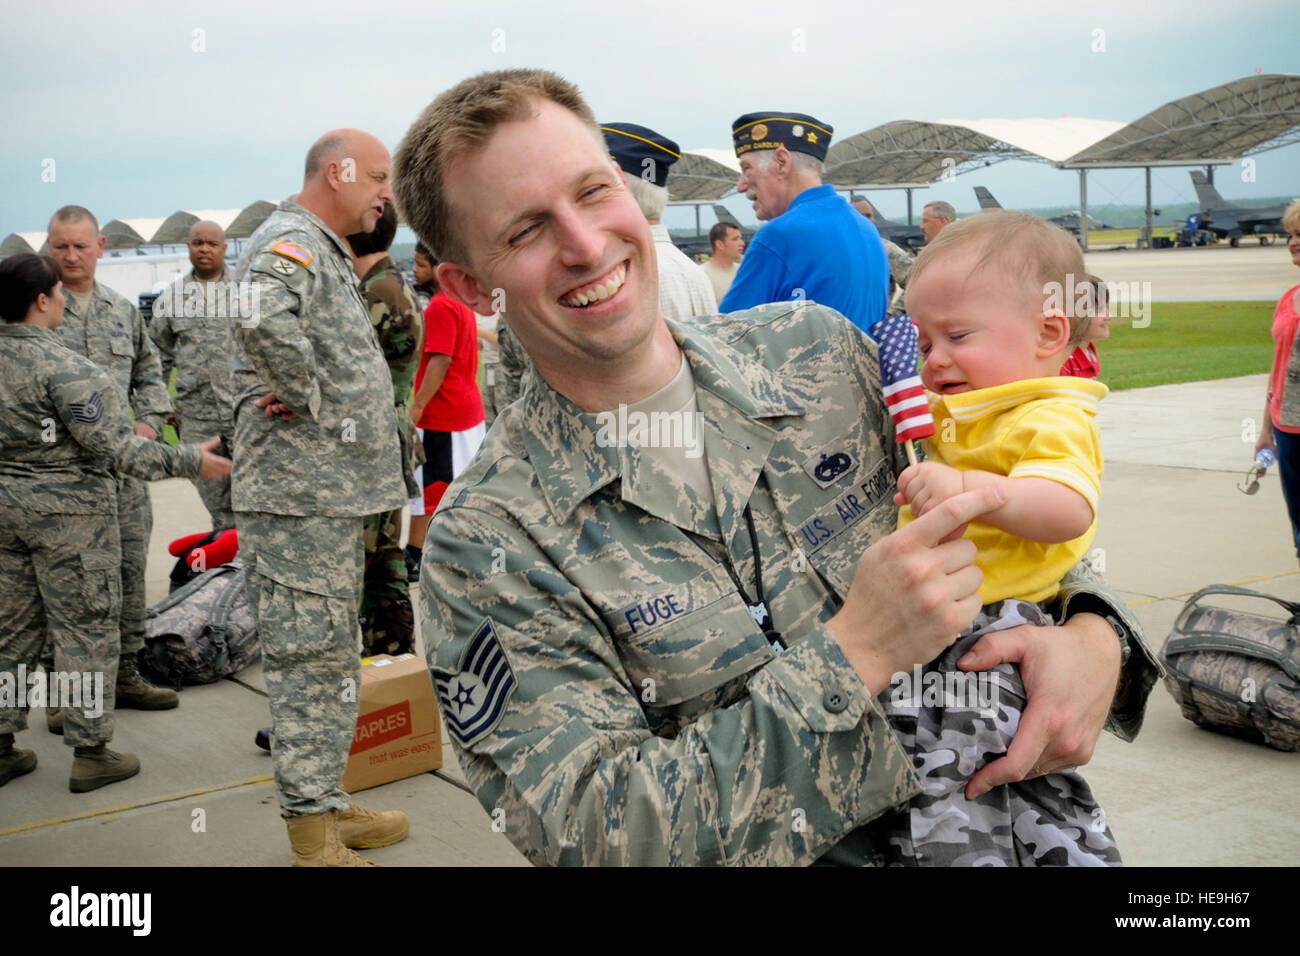 Technical Sgt. Mark Fuge assigned to the 169th Maintenance Operation Flight shares a laugh with his son just before boarding a bus to his plane. Airmen from the 169th Fighter Wing are deploying to Southwest Asia in support of Operation Iraqi Freedom. The deployment includes F-16 fighter jets, pilots, maintenance specialists and other support personnel, commonly referred to as an aviation package.  Master Sgt. Marvin Preston, 169th FW Stock Photo